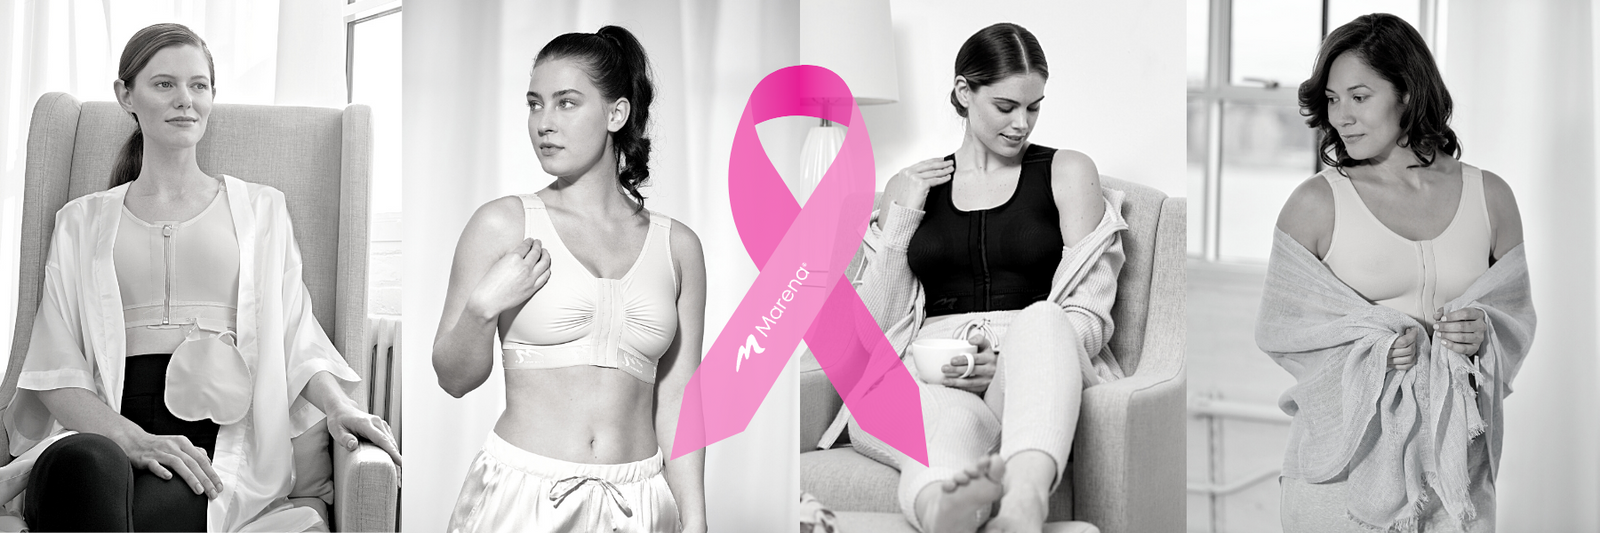 The Intuition Recovery Bra - A New Concept In Breast Care Recovery